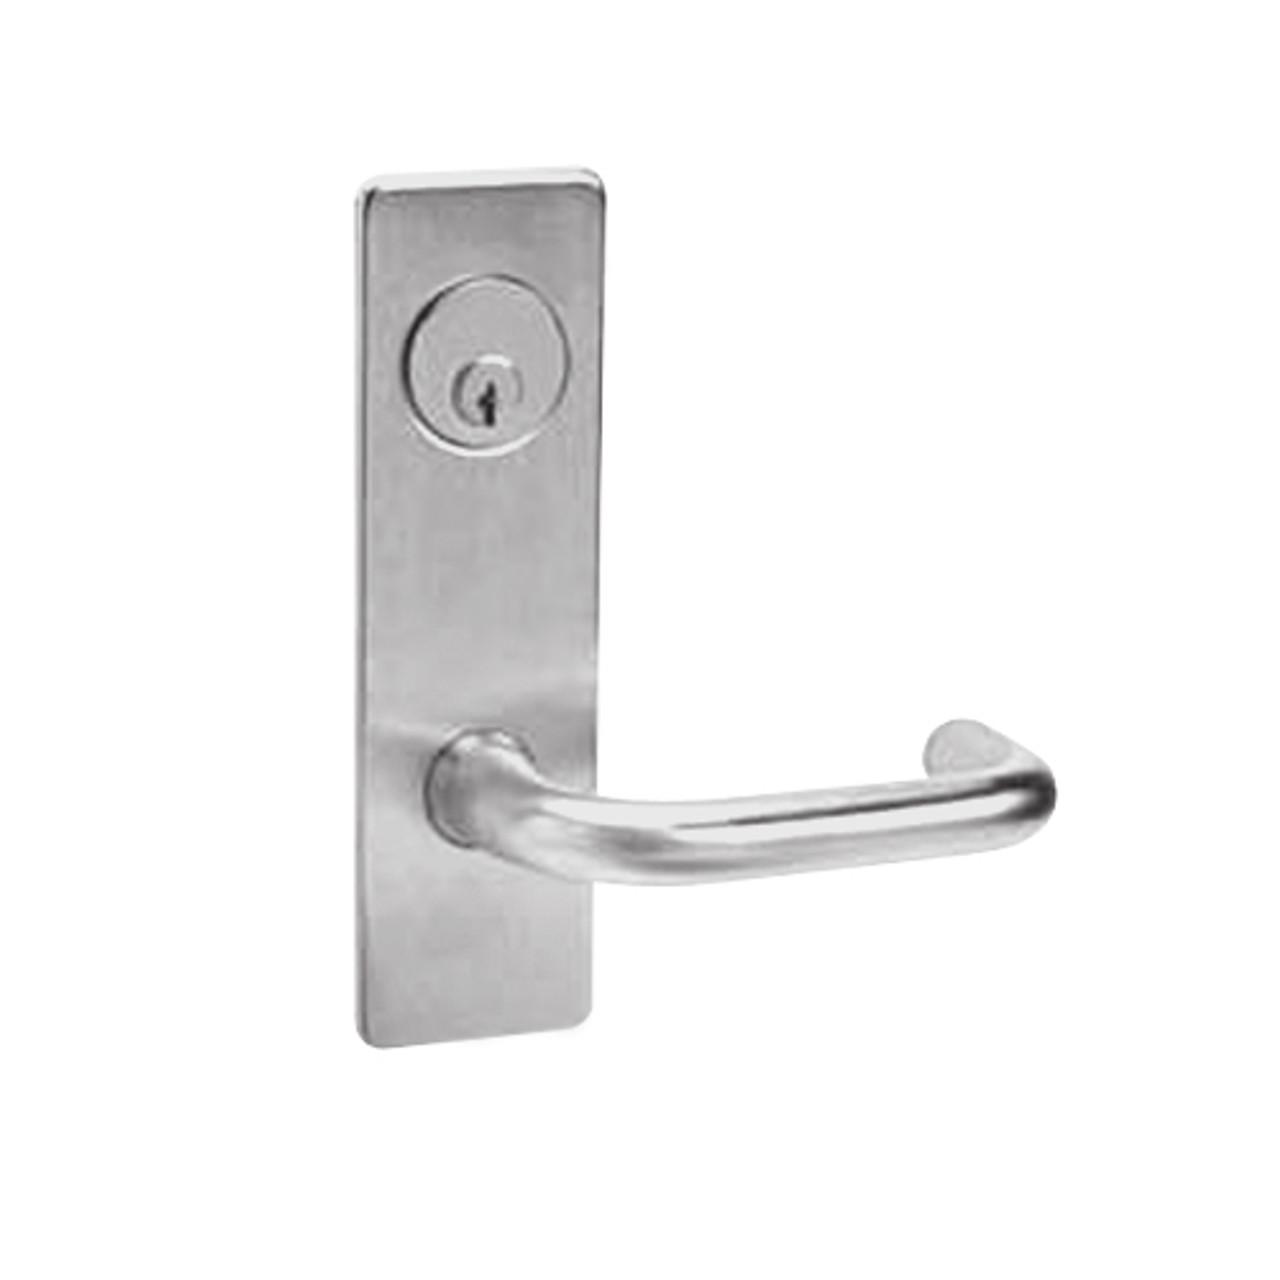 ML2058-LWP-630 Corbin Russwin ML2000 Series Mortise Entrance Holdback Locksets with Lustra Lever in Satin Stainless